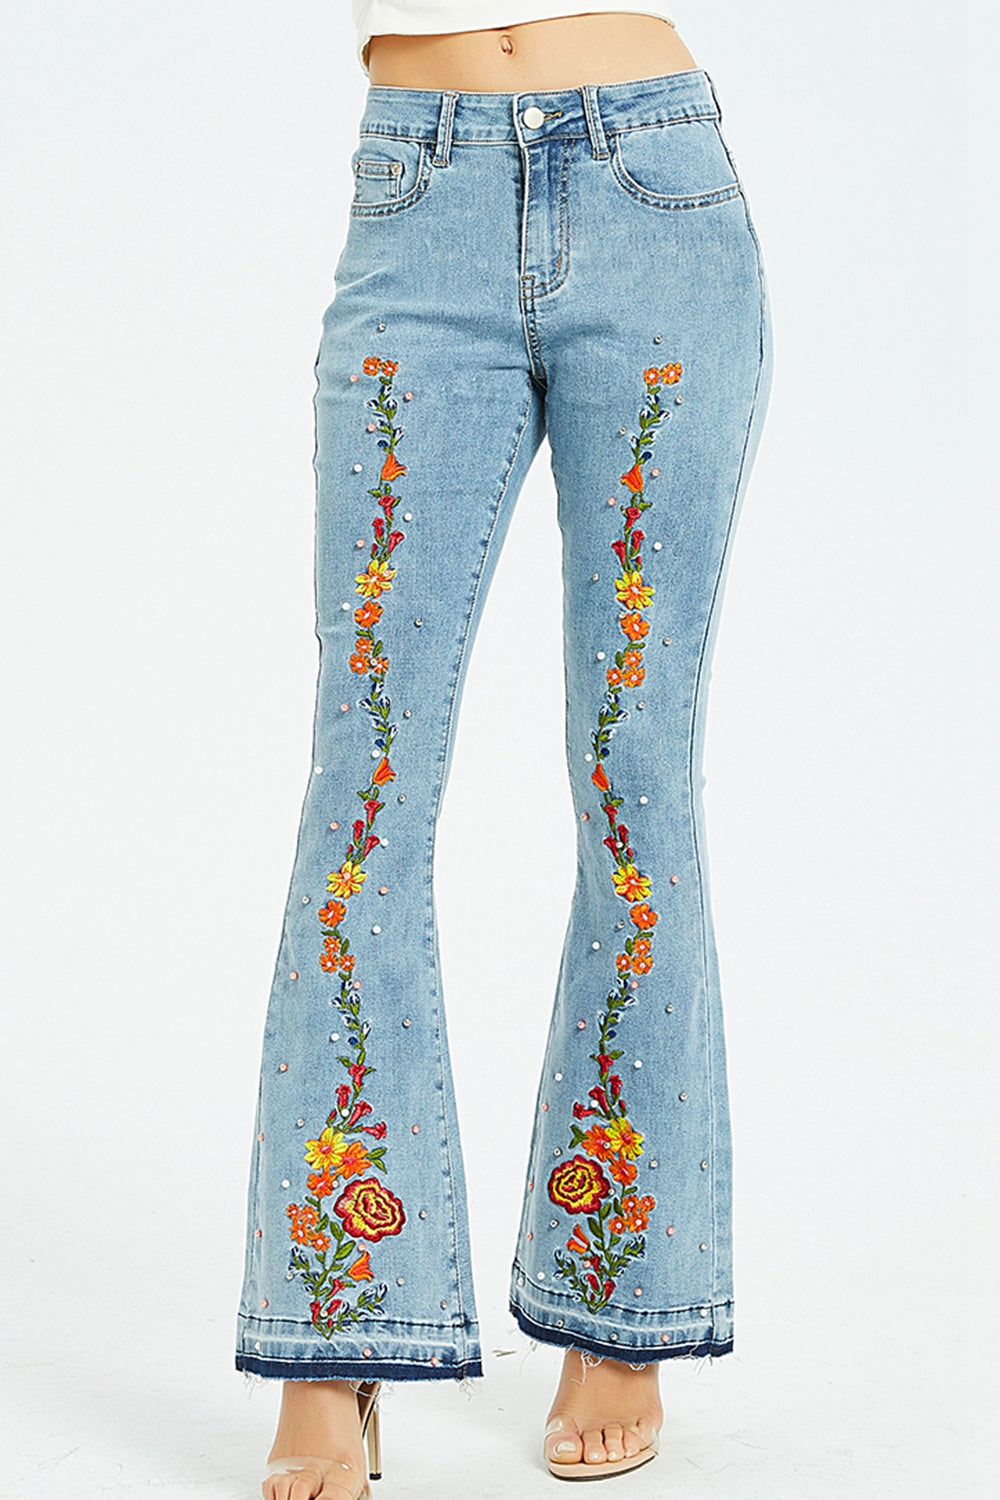 swvws Full Size Flower Embroidery Wide Leg Jeans